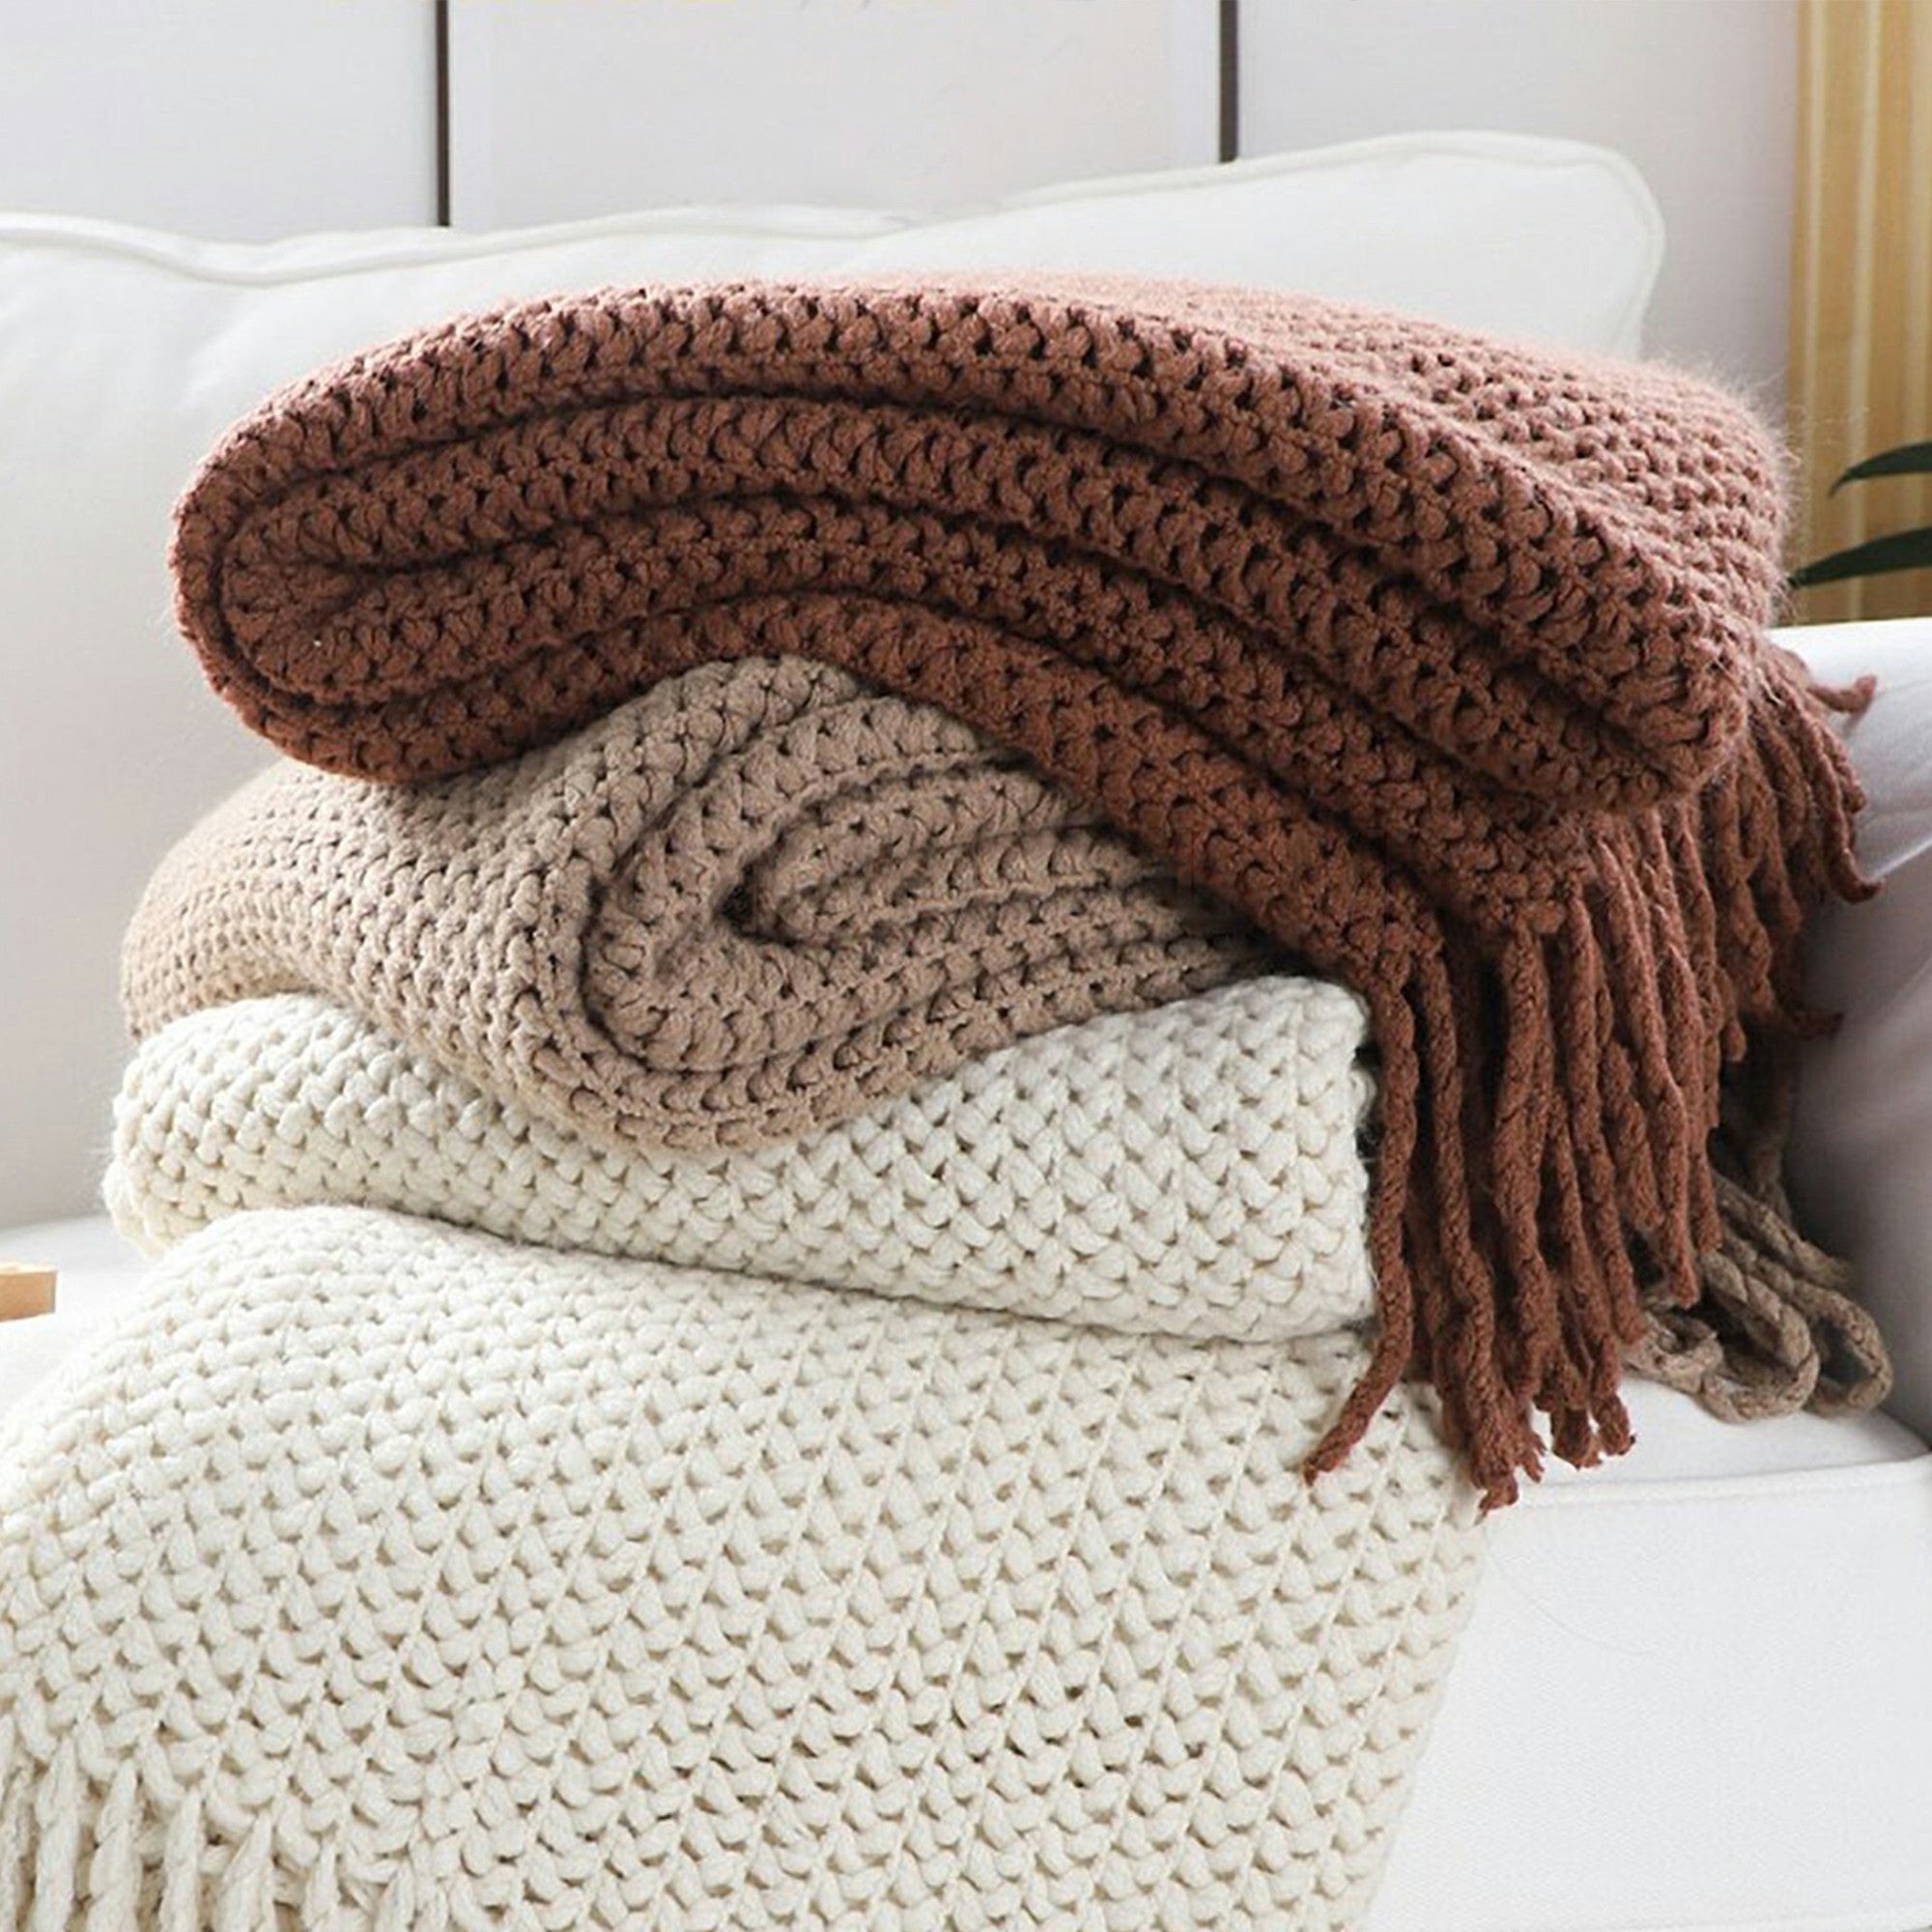 Knitted Mesh Throw Blanket